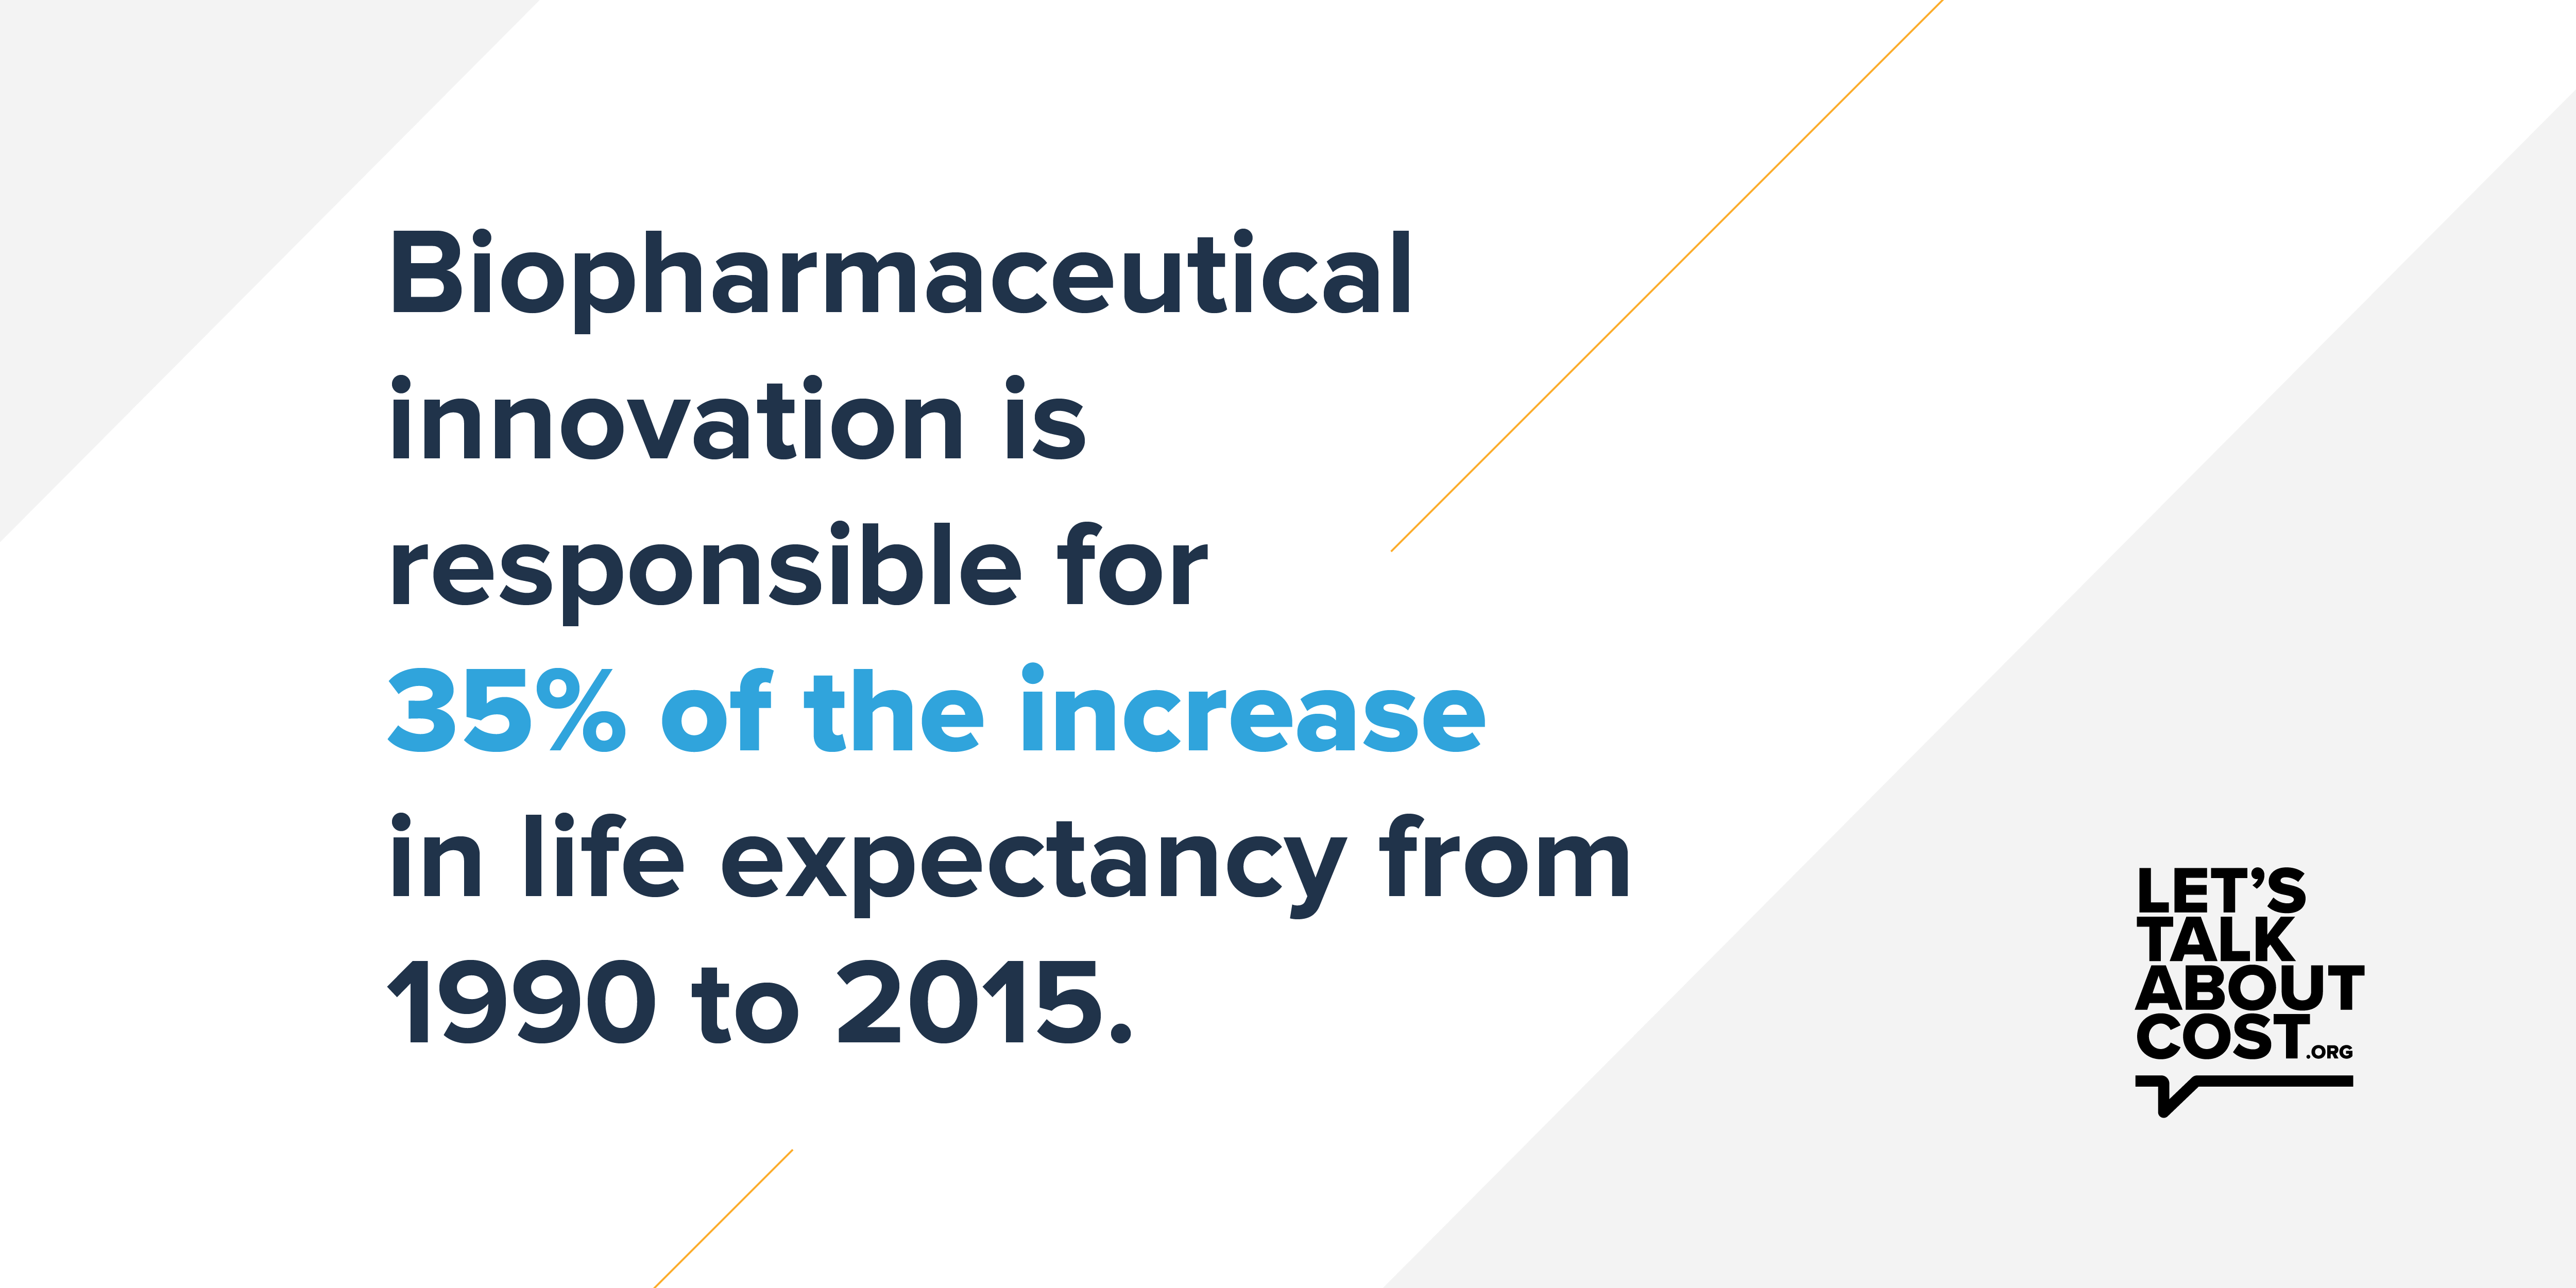 study-finds-biopharmaceutical-innovation-is-responsible-for-35-of-the-increase-in-life-expectancy-from-1990-to-2015